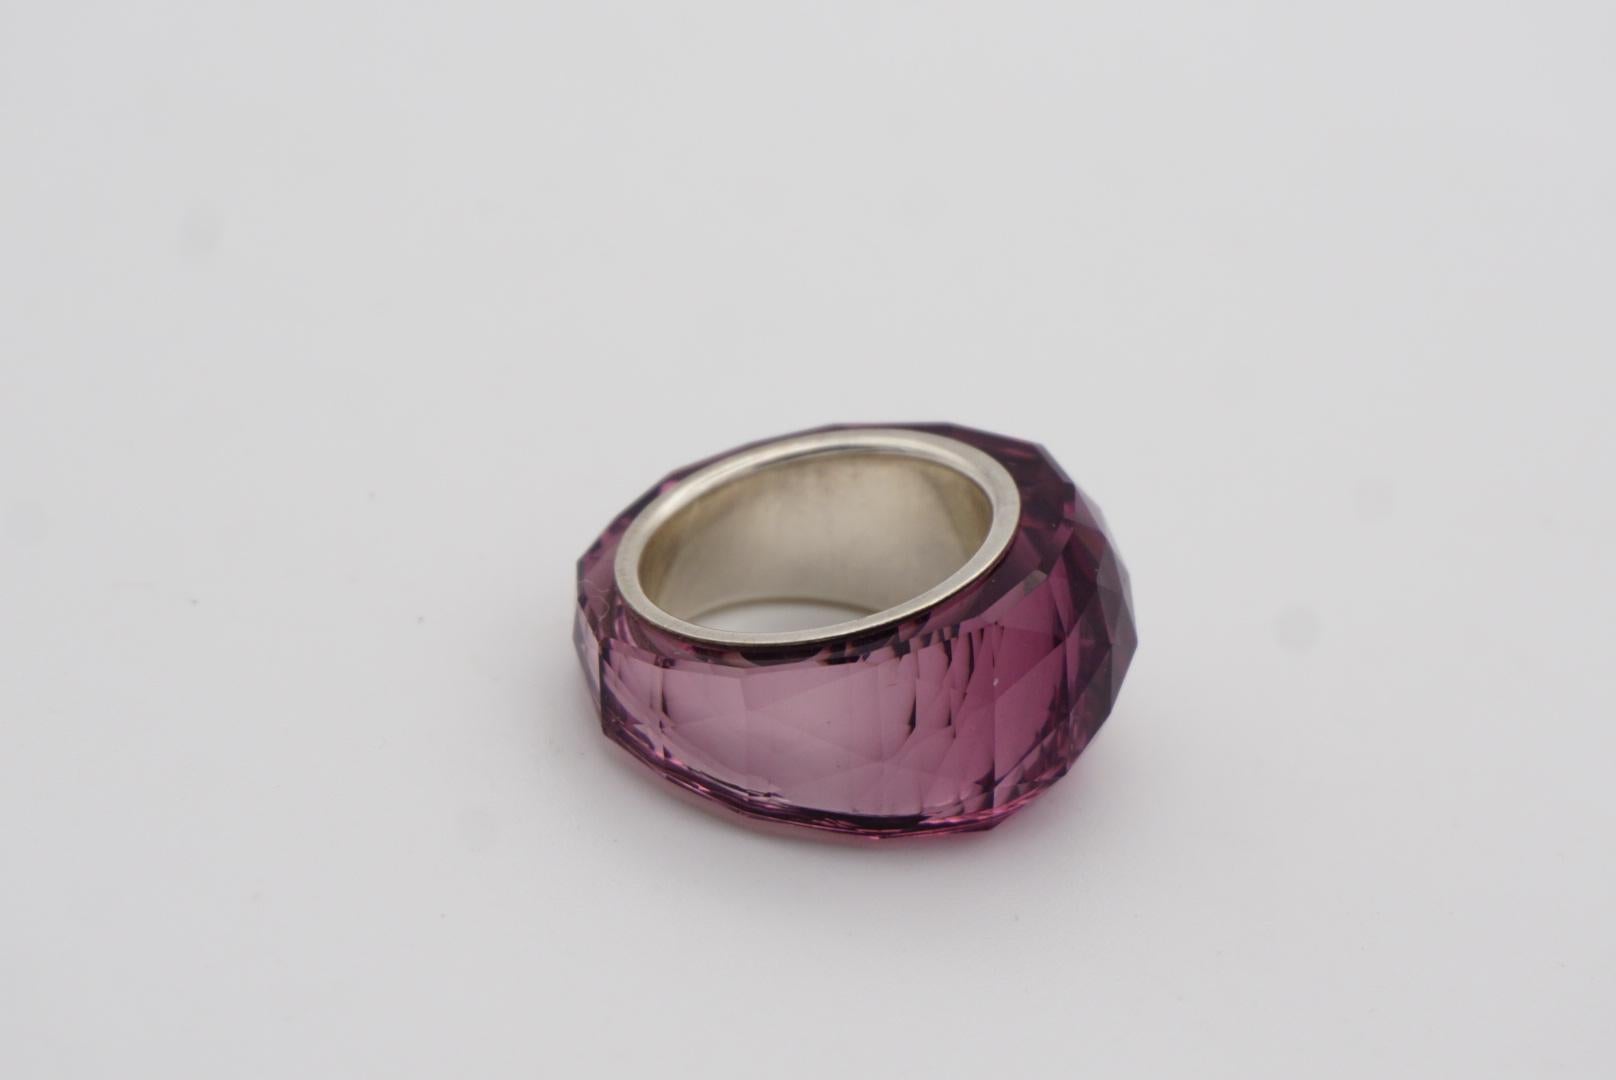 Swarovski Nirvana Cocktail Fully Cut Purple Petite Small Ring, Silver Plated, 52 For Sale 2